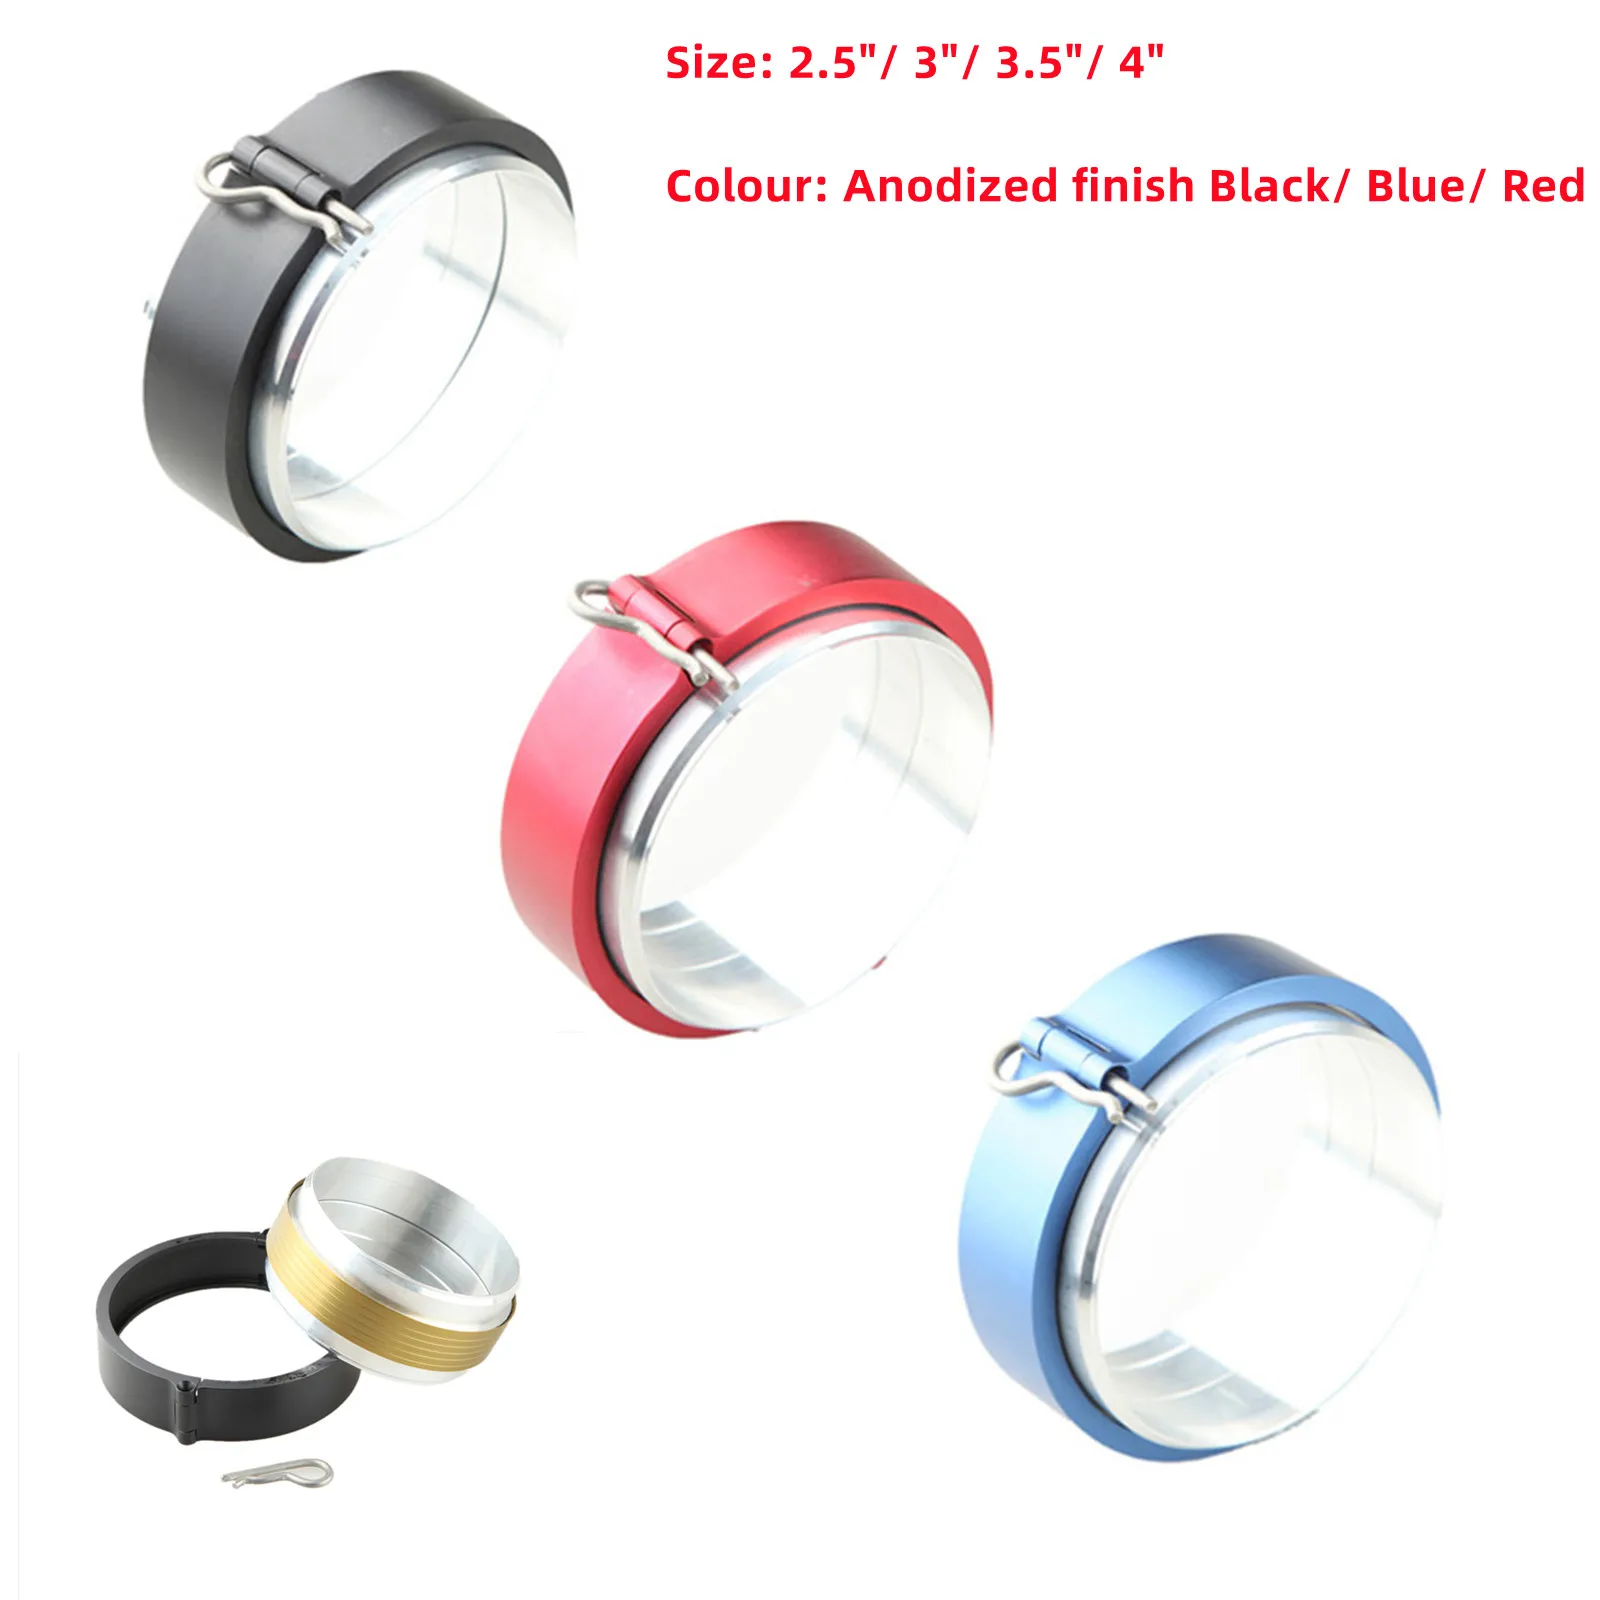 

2.5"/ 3"/ 3.5"/ 4" Aluminum Clamshell Flange Clamp Kit Turbo Intercooler Pipe BLACK/BLUE/RED